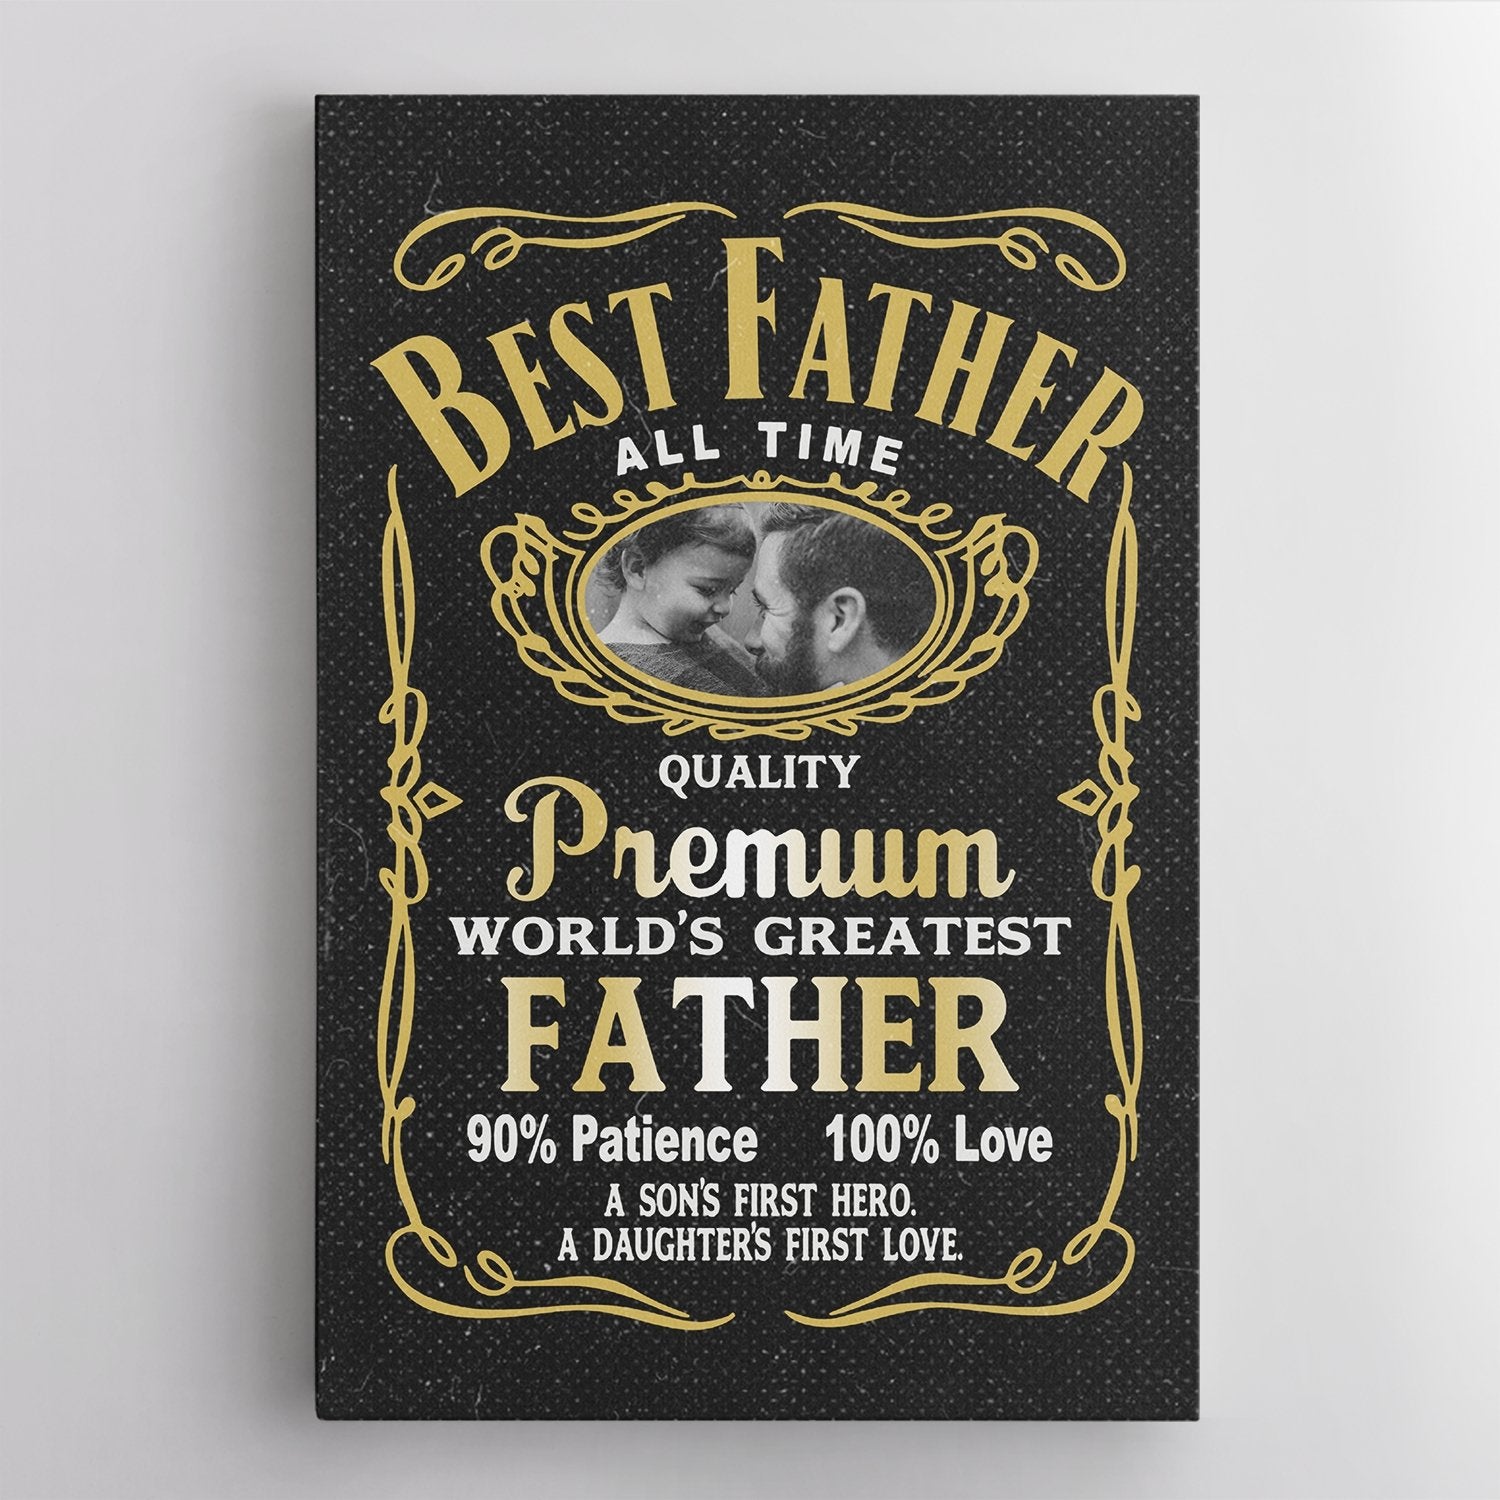 Best Father All Time, Custom Photo, Canvas Art Print